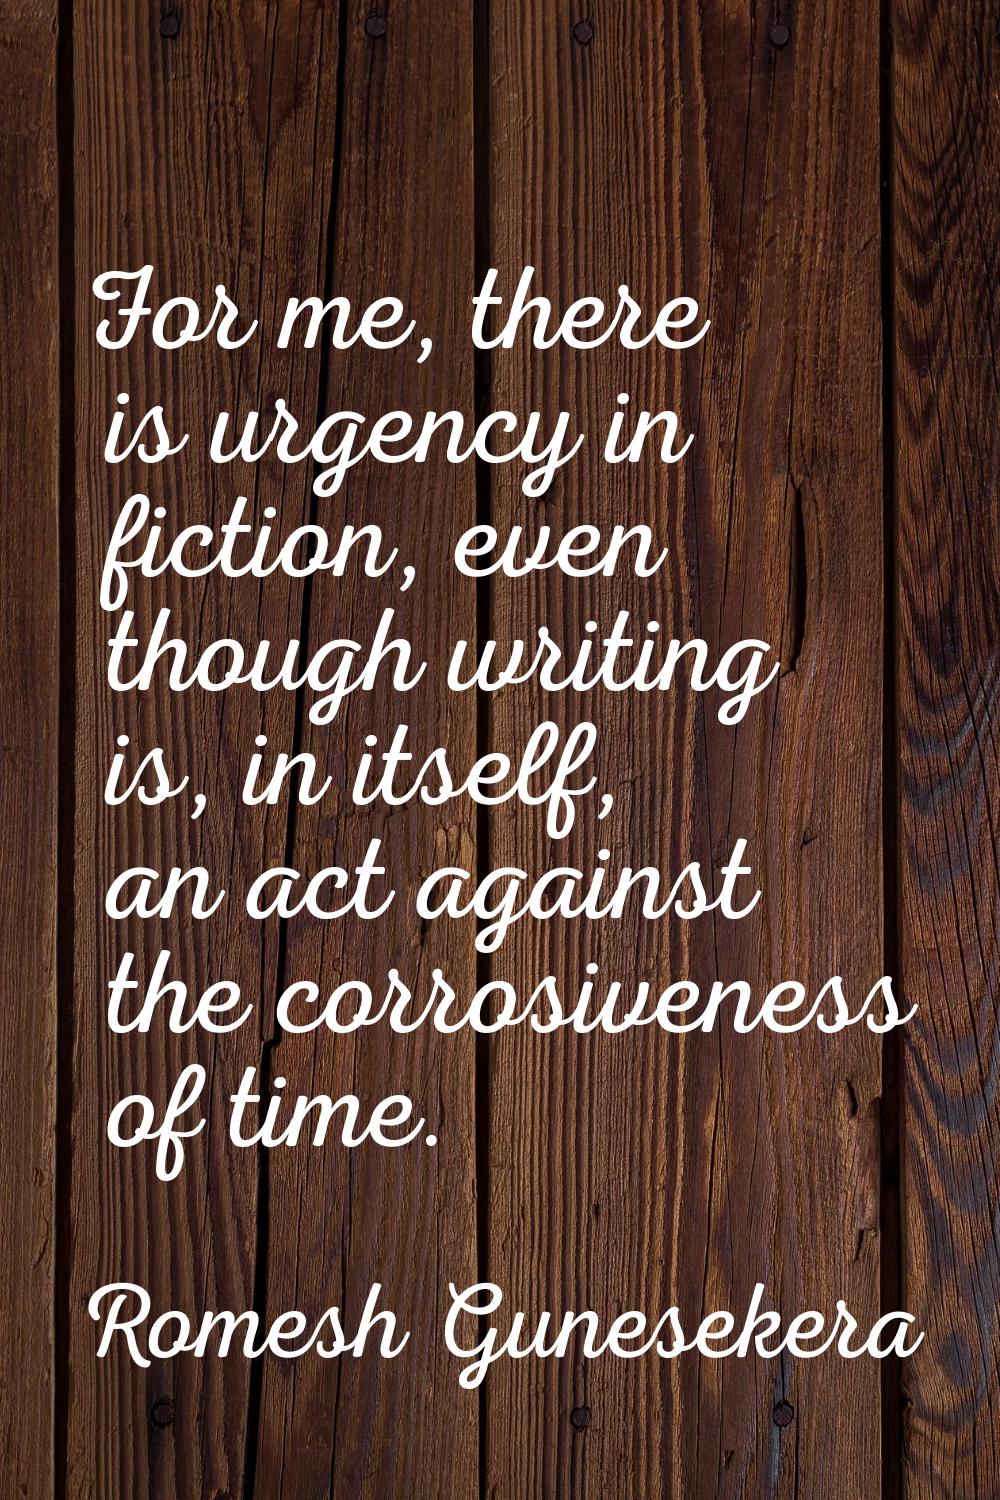 For me, there is urgency in fiction, even though writing is, in itself, an act against the corrosiv